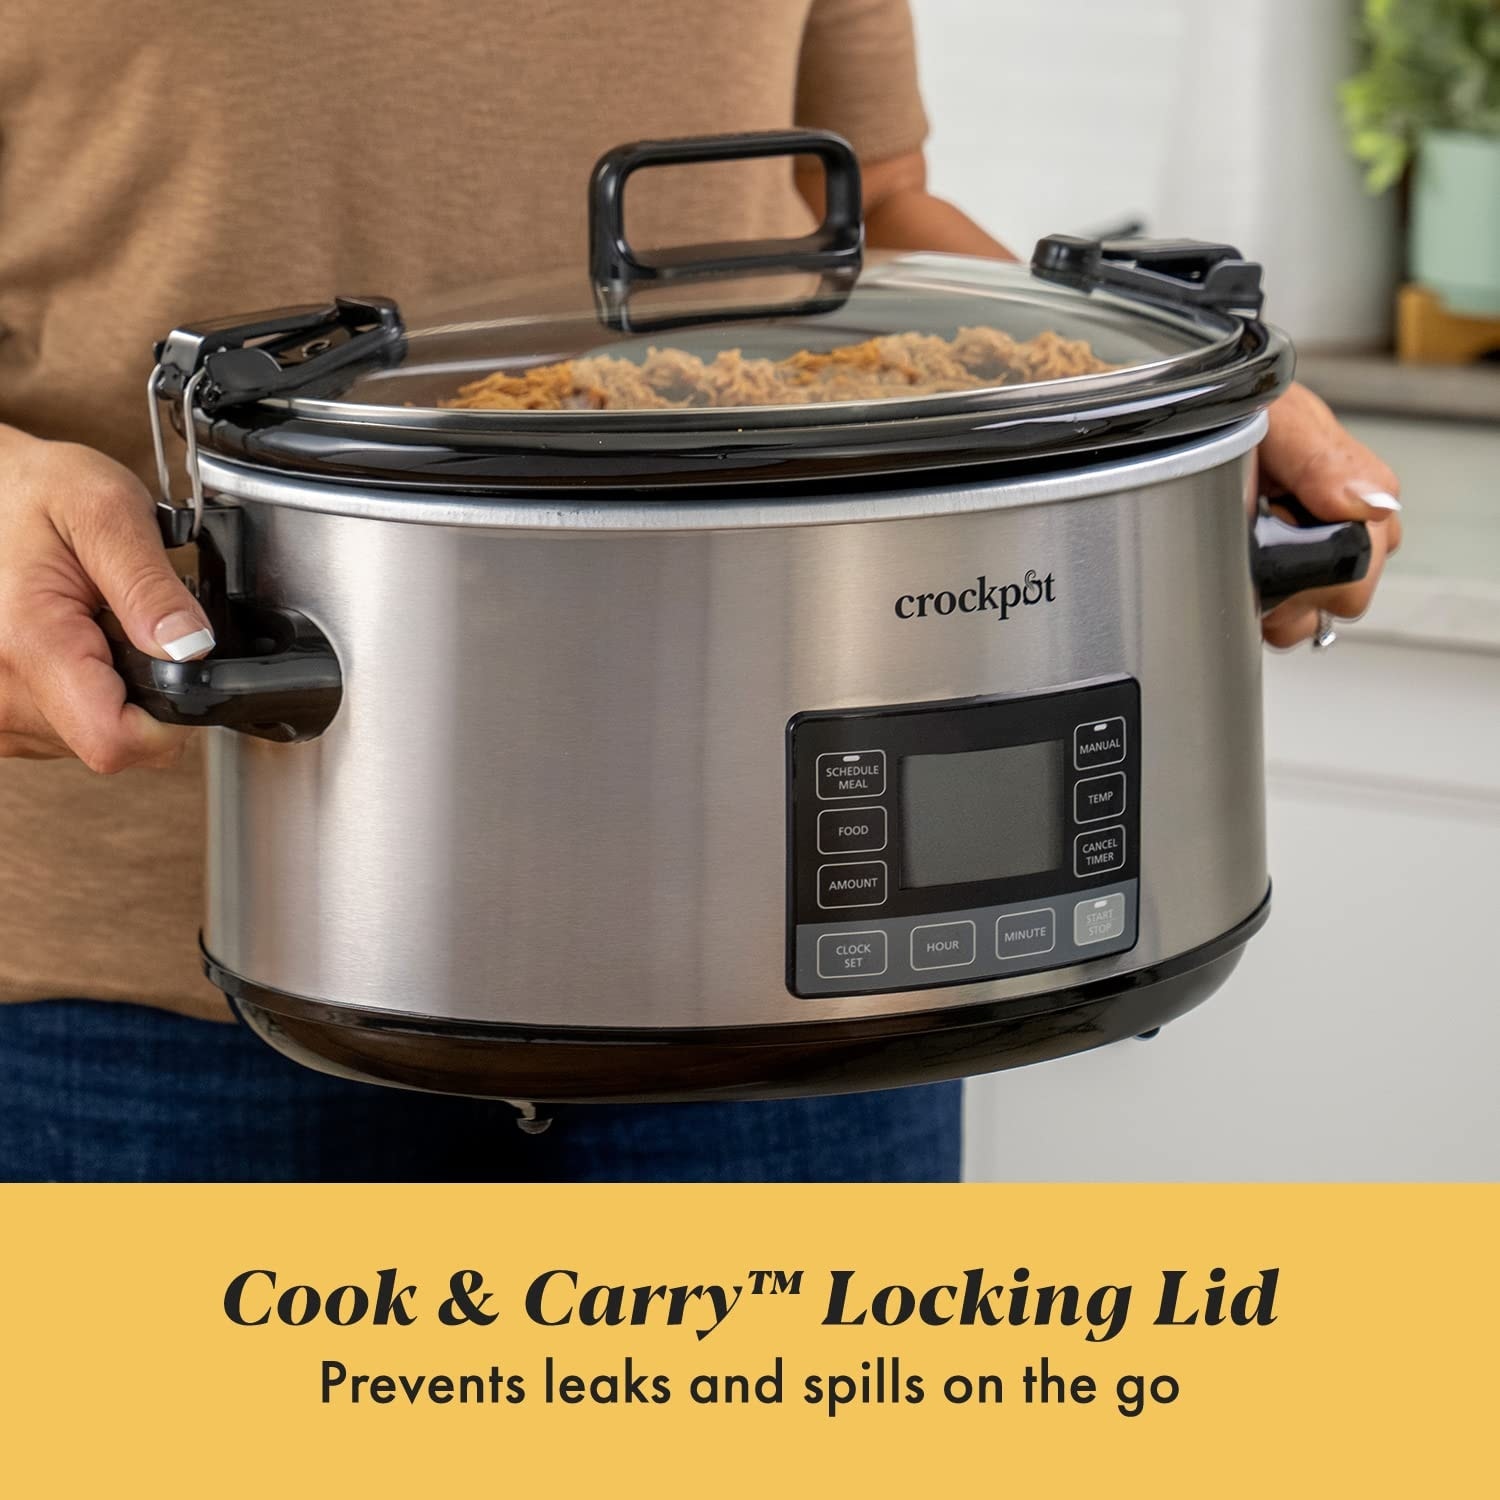 https://ak1.ostkcdn.com/images/products/is/images/direct/bd88bddc3c9463bb935f352f2e61a26c24733b08/7-Quart-Portable-Programmable-Slow-Cooker-with-Timer-and-Locking-Lid%2C-Stainless-Steel.jpg